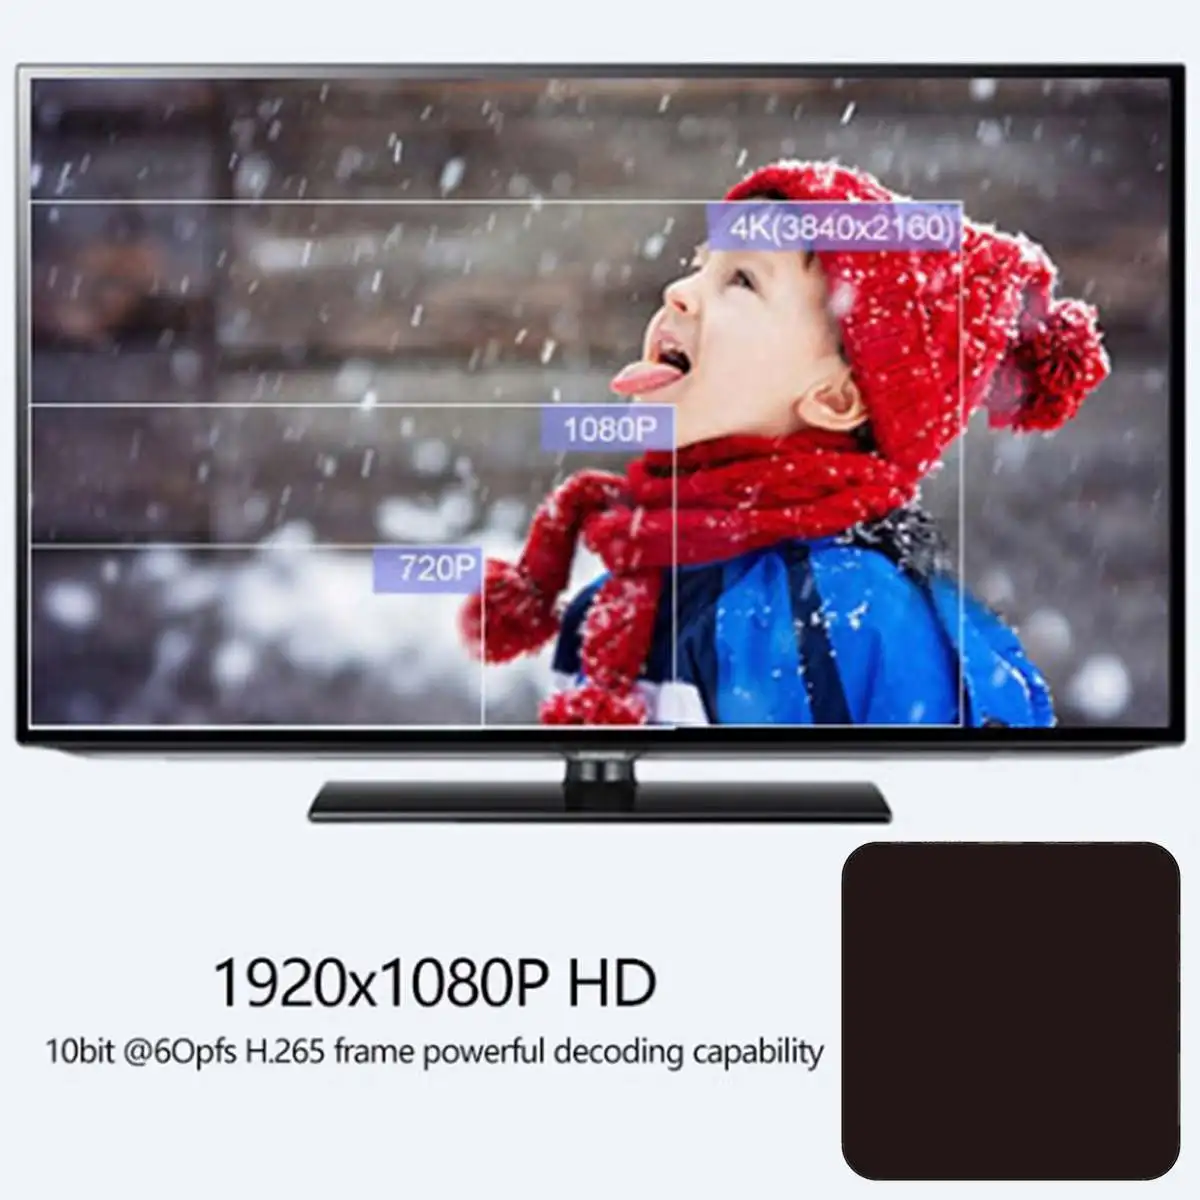 4K Quad Core, 4GB 64GB Android 10.1 TV BOX 2.0 HD HDMI SD Lizdas WiFi 2.4 GHz Tinklo Player Network Media Player 